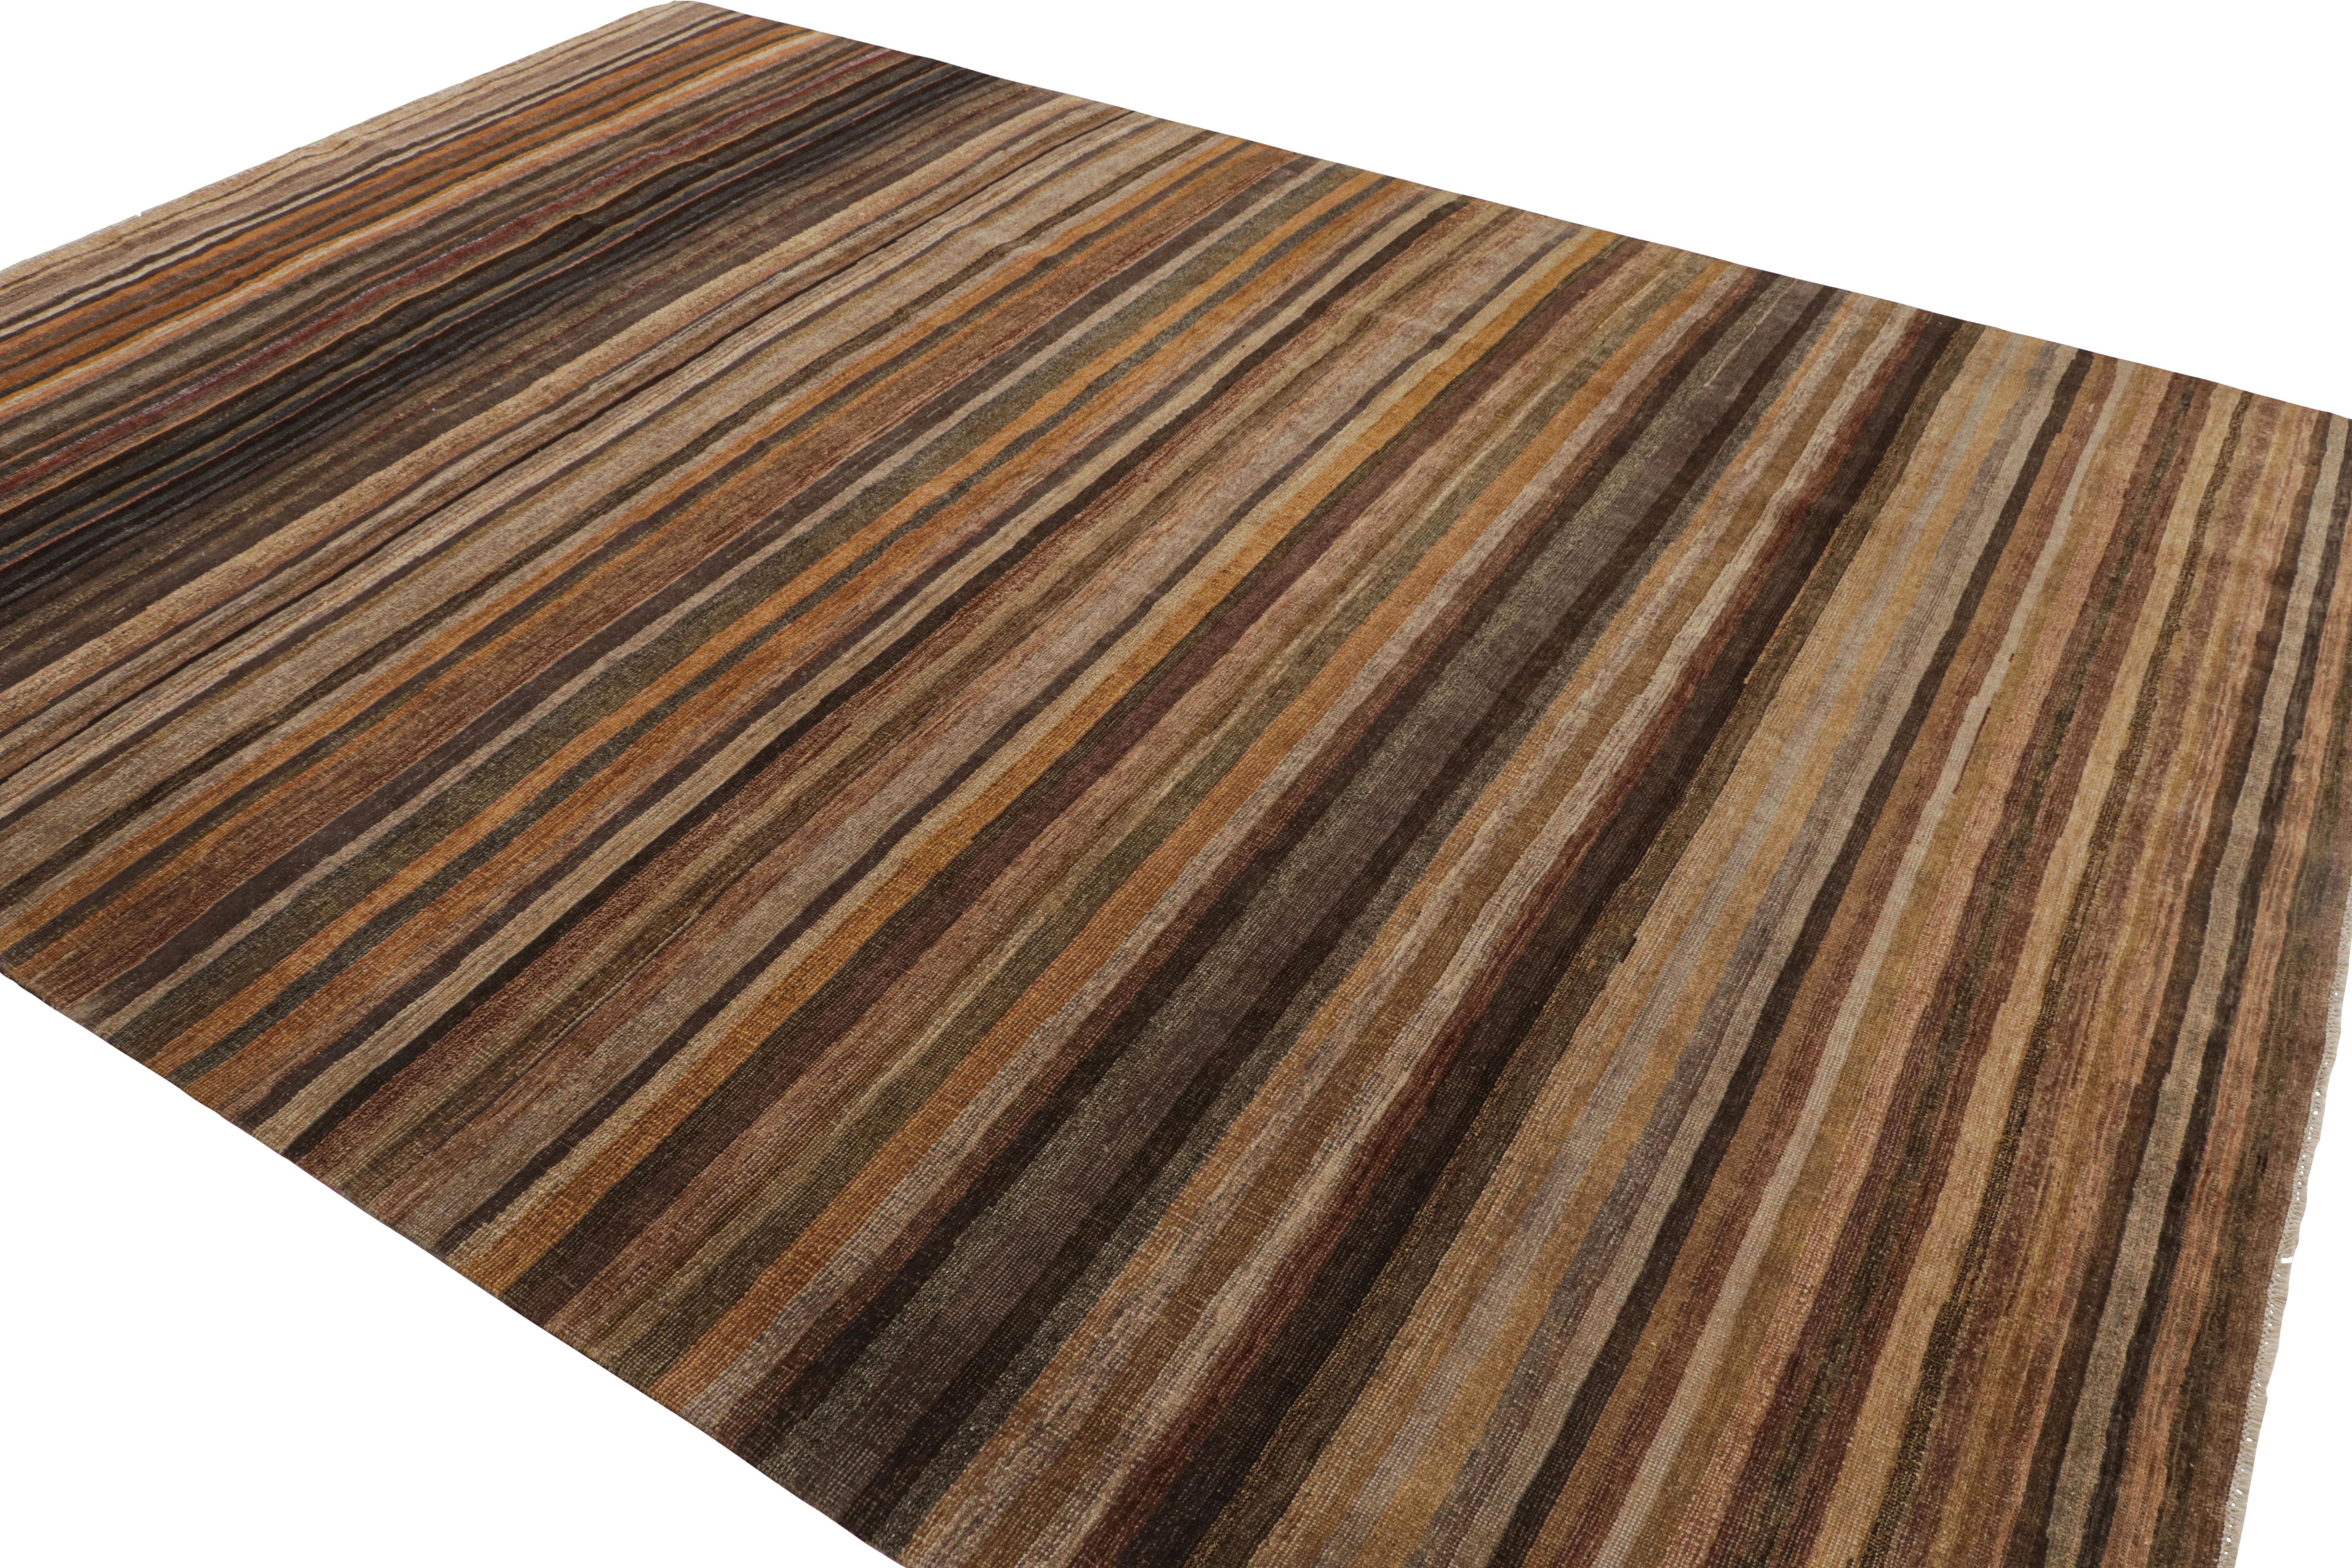 Indian Rug & Kilim’s Textural Rug in Beige-Brown Stripes and Striae For Sale